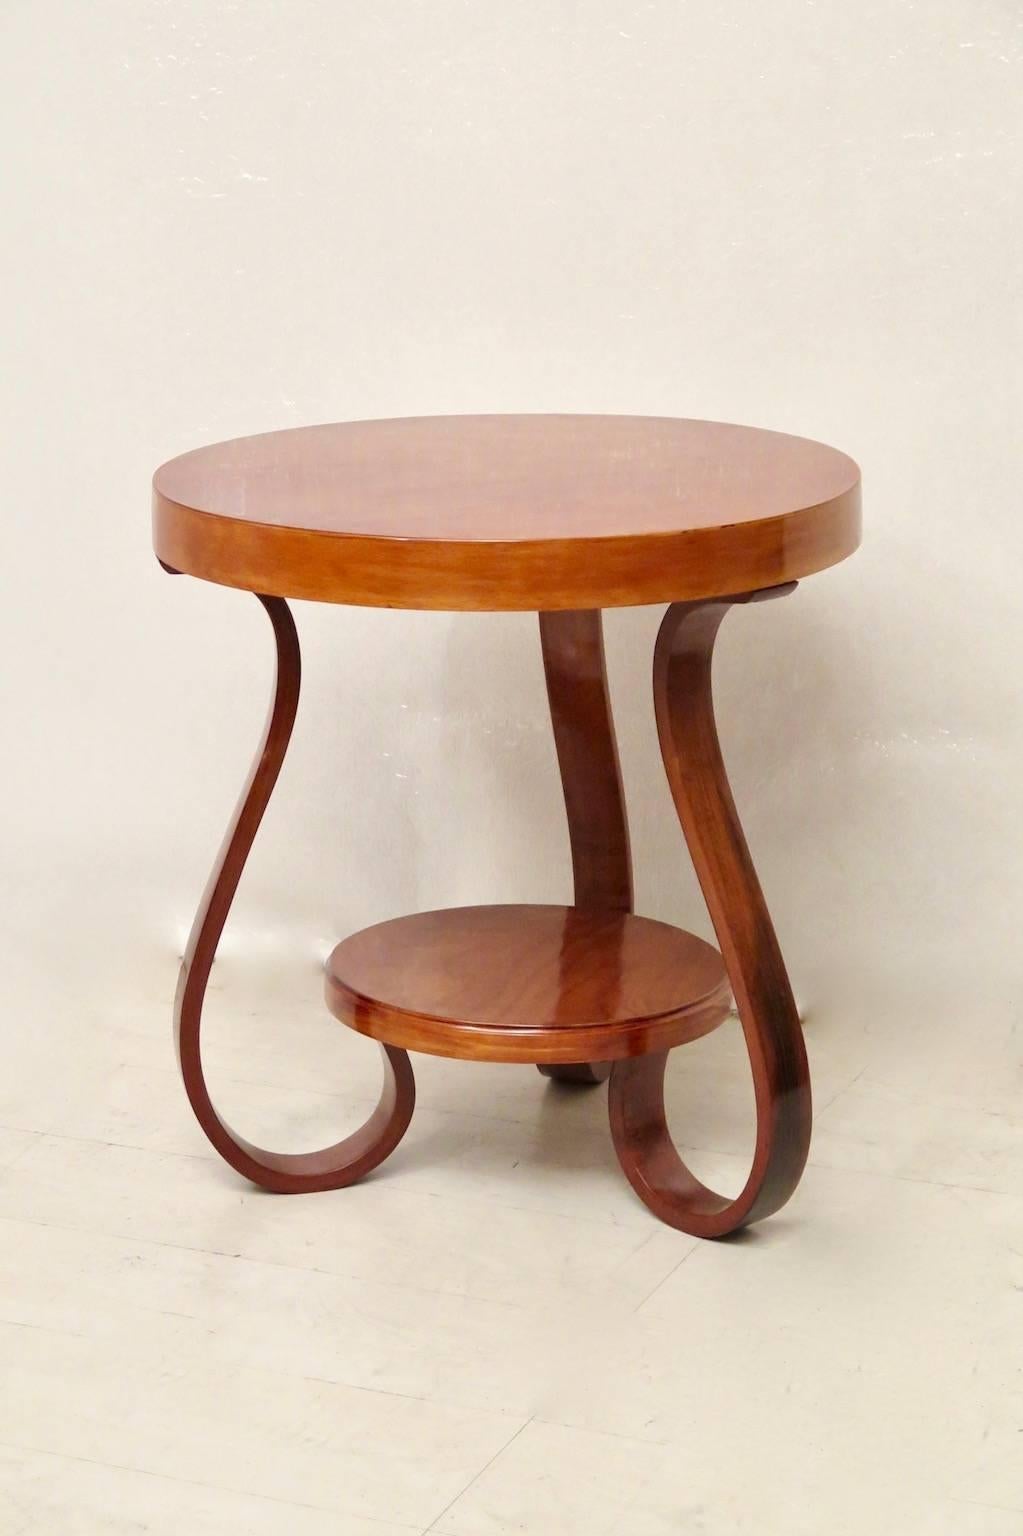 Very classic Art Deco curved wooden side table.

Of round shape and veneered cherrywood top, with a band that runs all around. Under the top, there are three legs bent by steam. These are held together by a cherrywood top, placed underneath. The